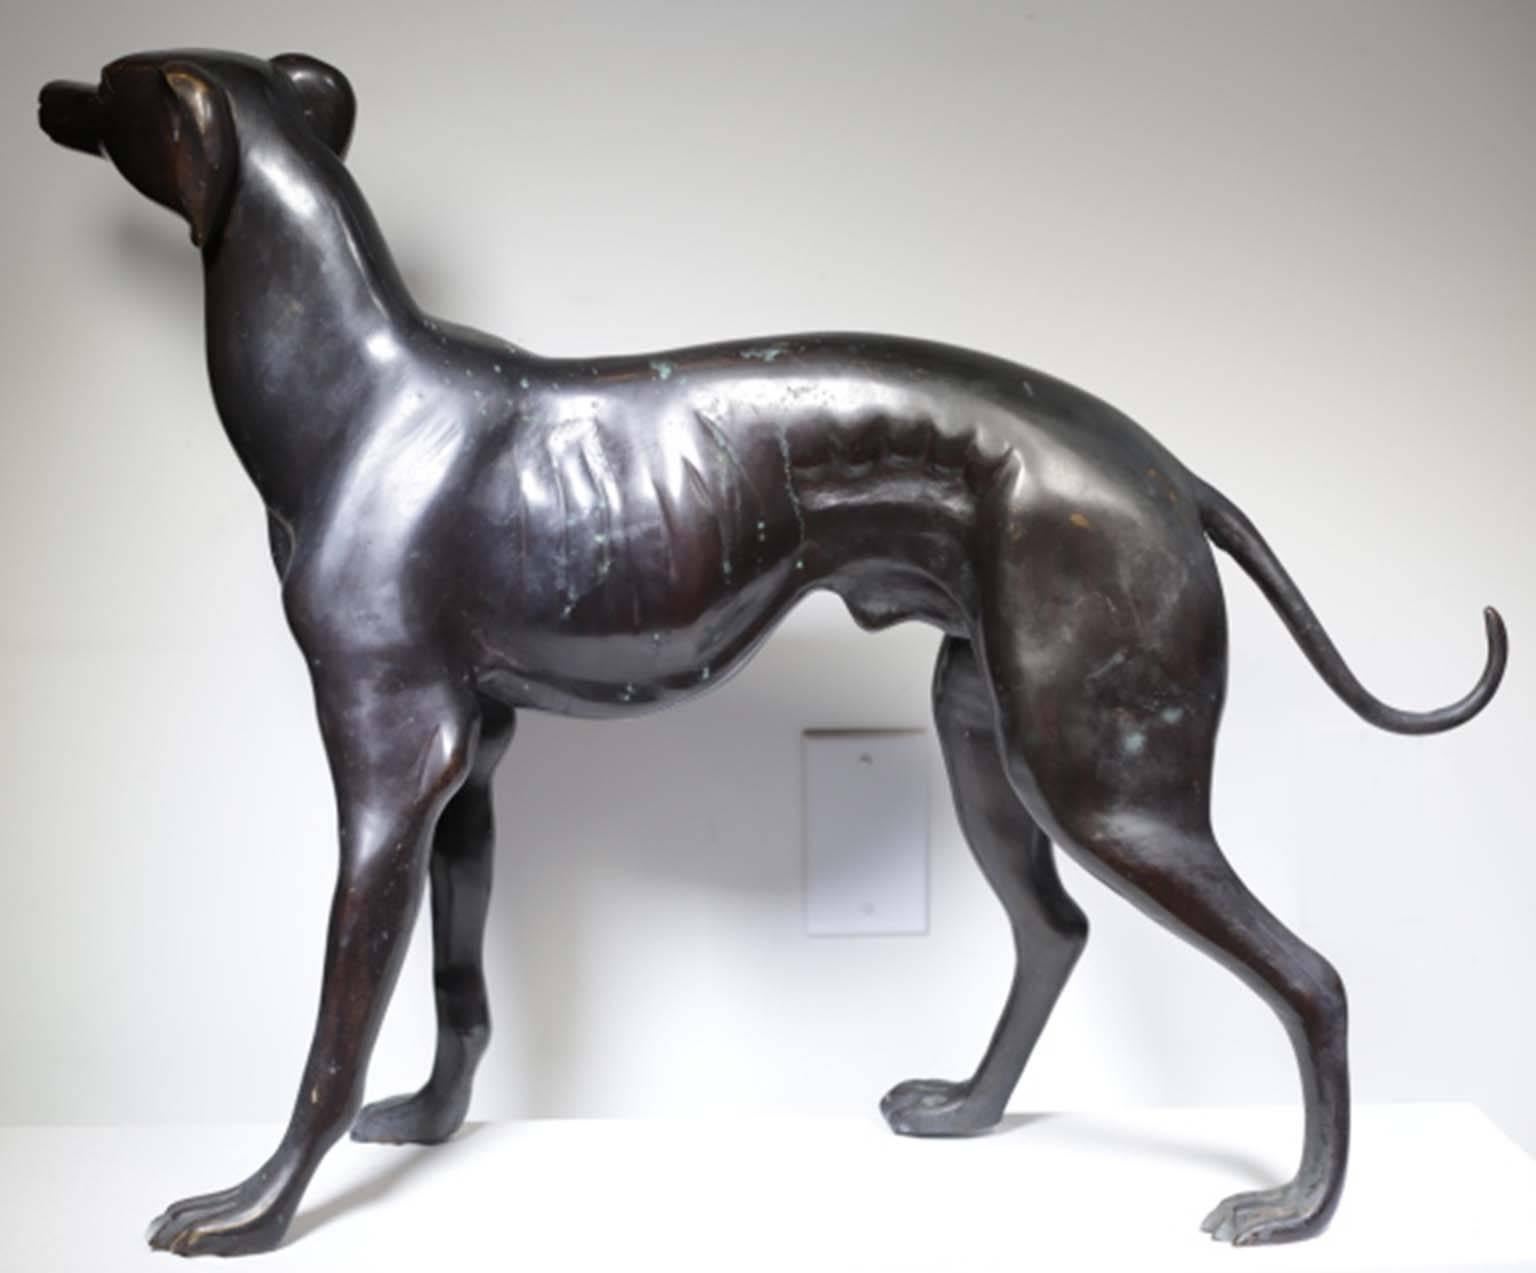 Bronze greyhound in striking pose. Possibly comes from the now gone Cliff House in San Francisco but not confirmed.